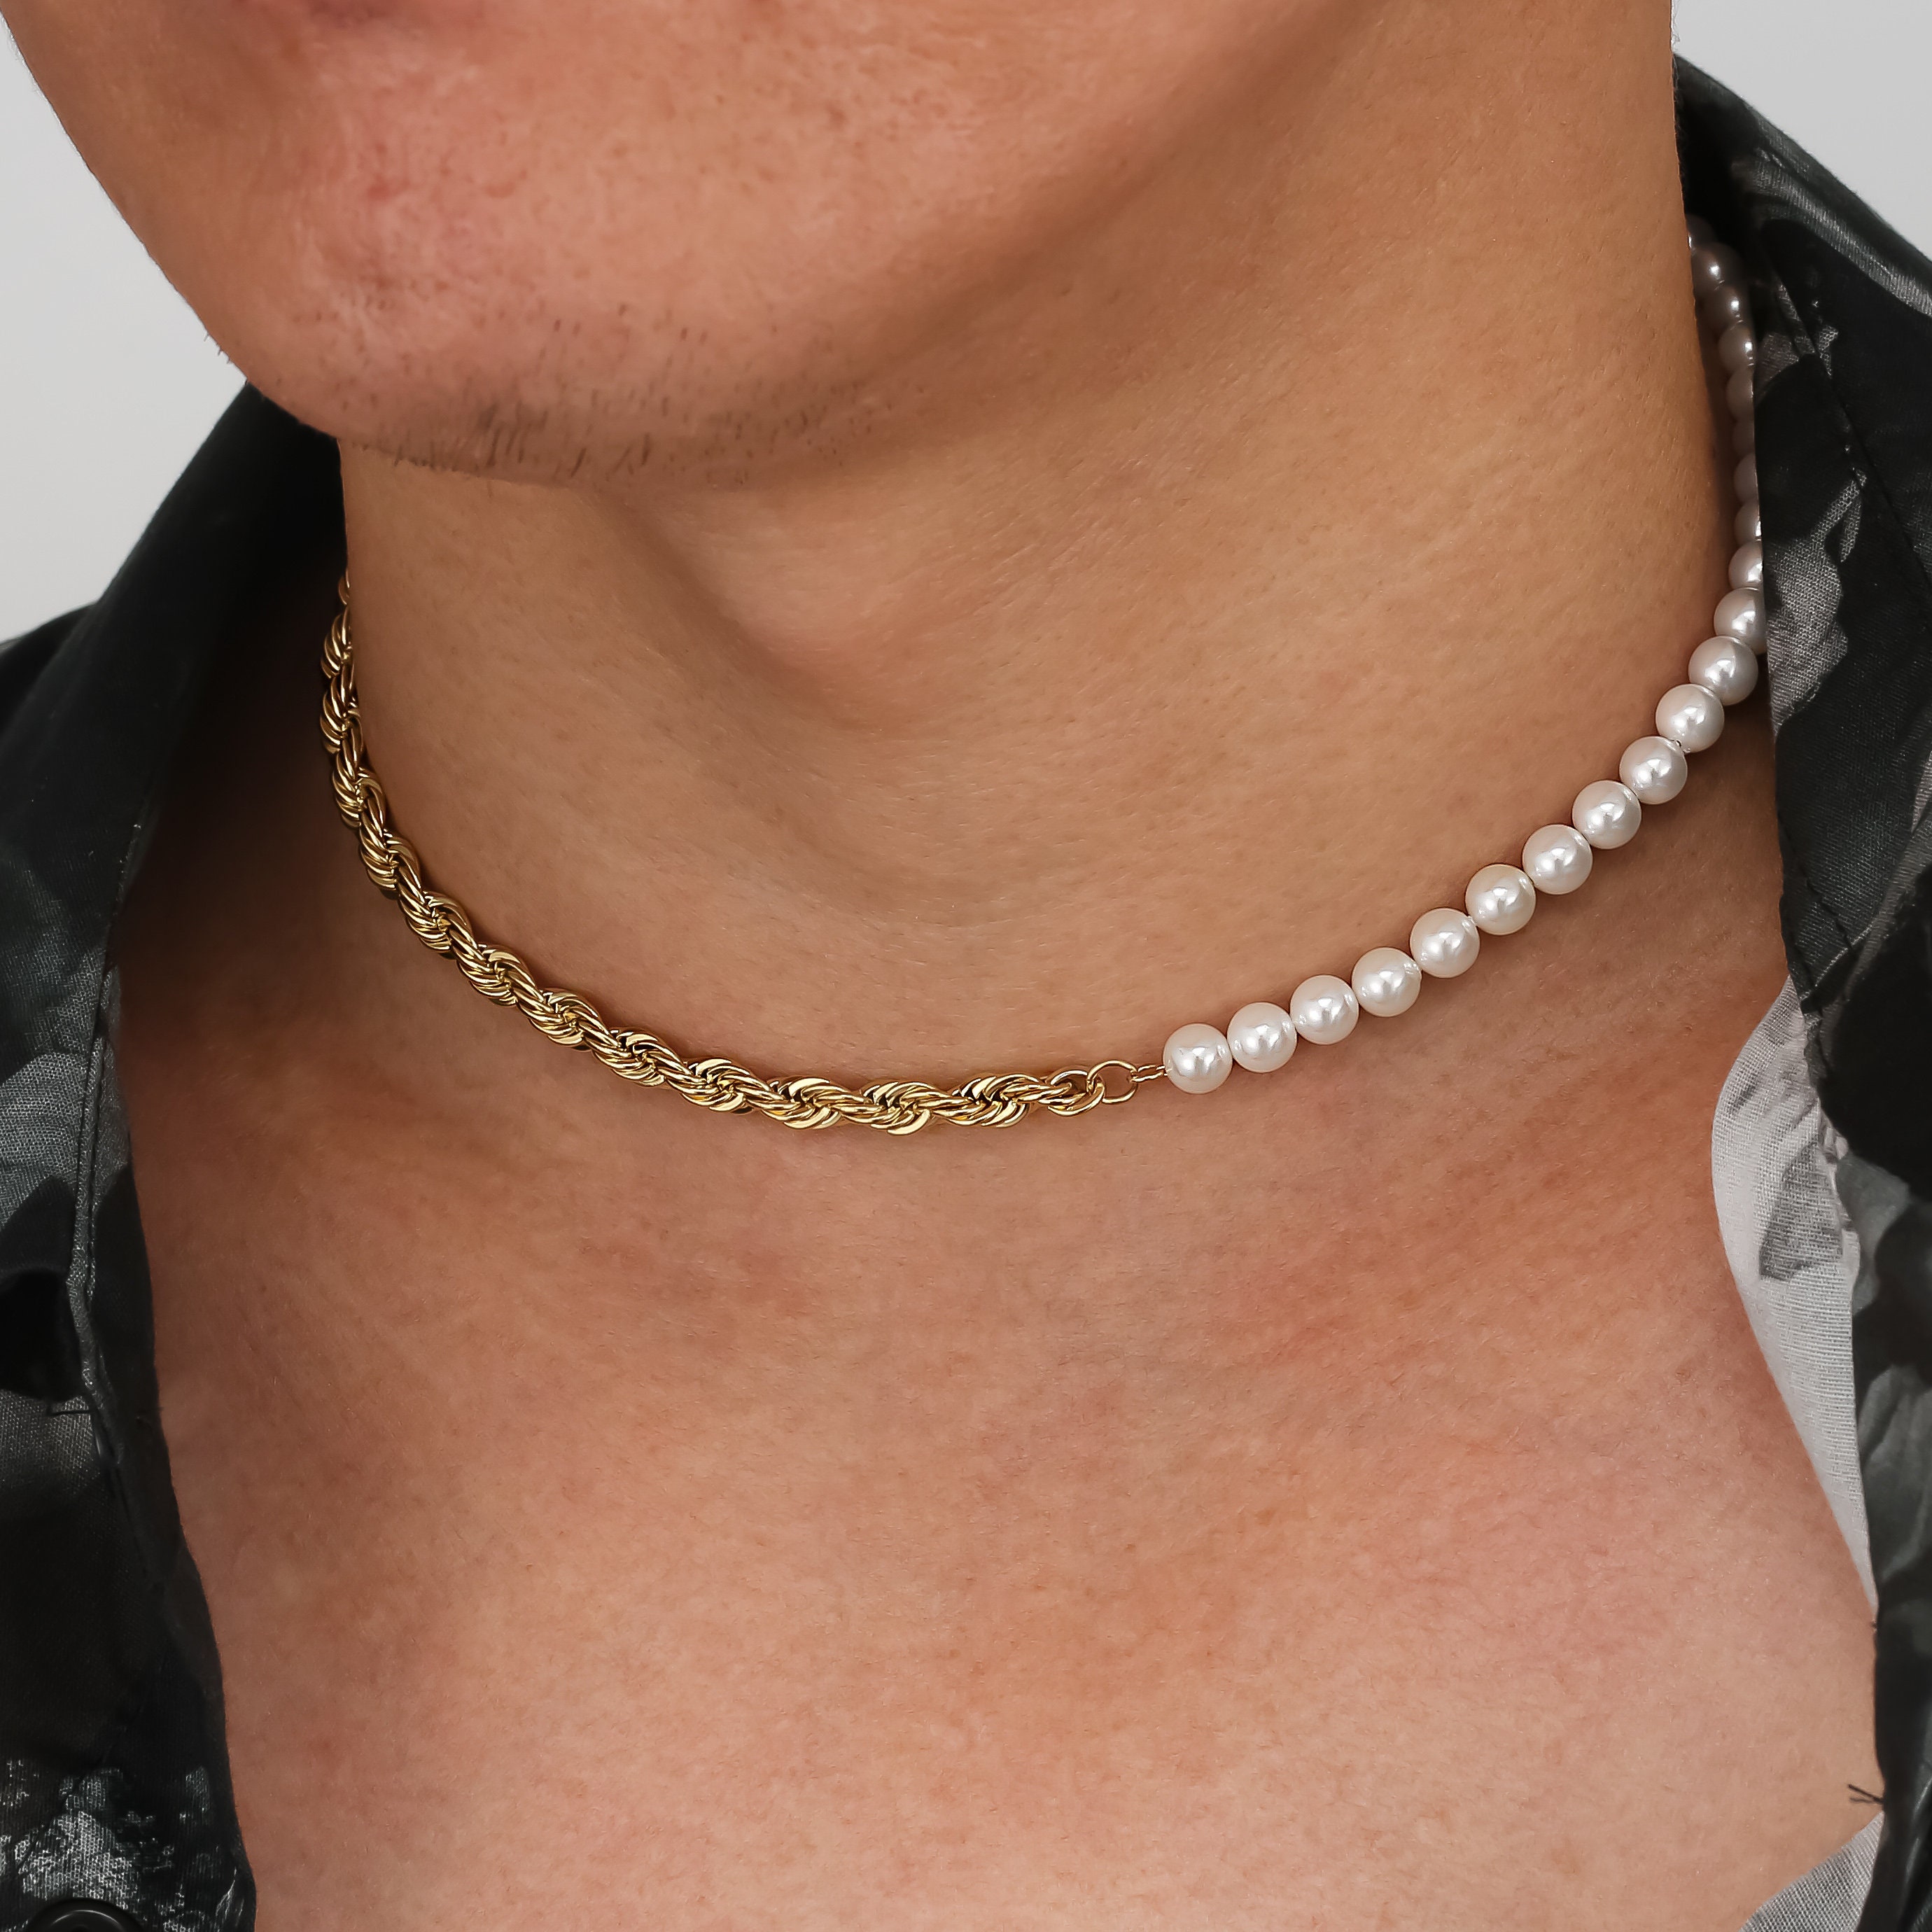 How to Create A Half Chain Half Baroque Pearl Necklace - YouTube